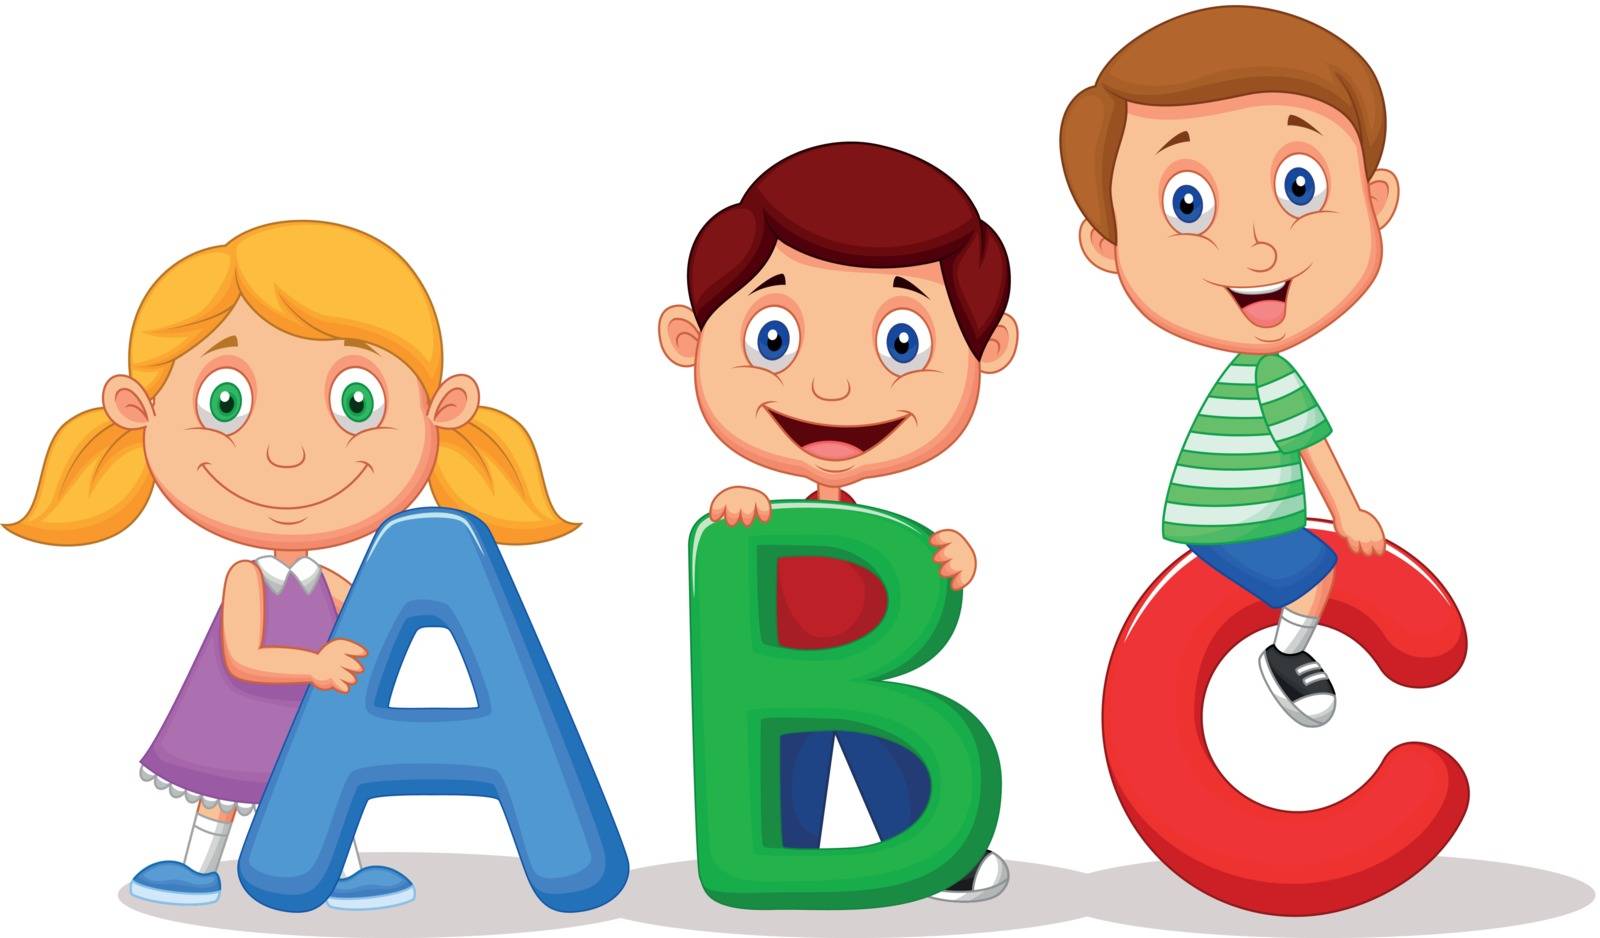 Vector Illustration of Children with ABC